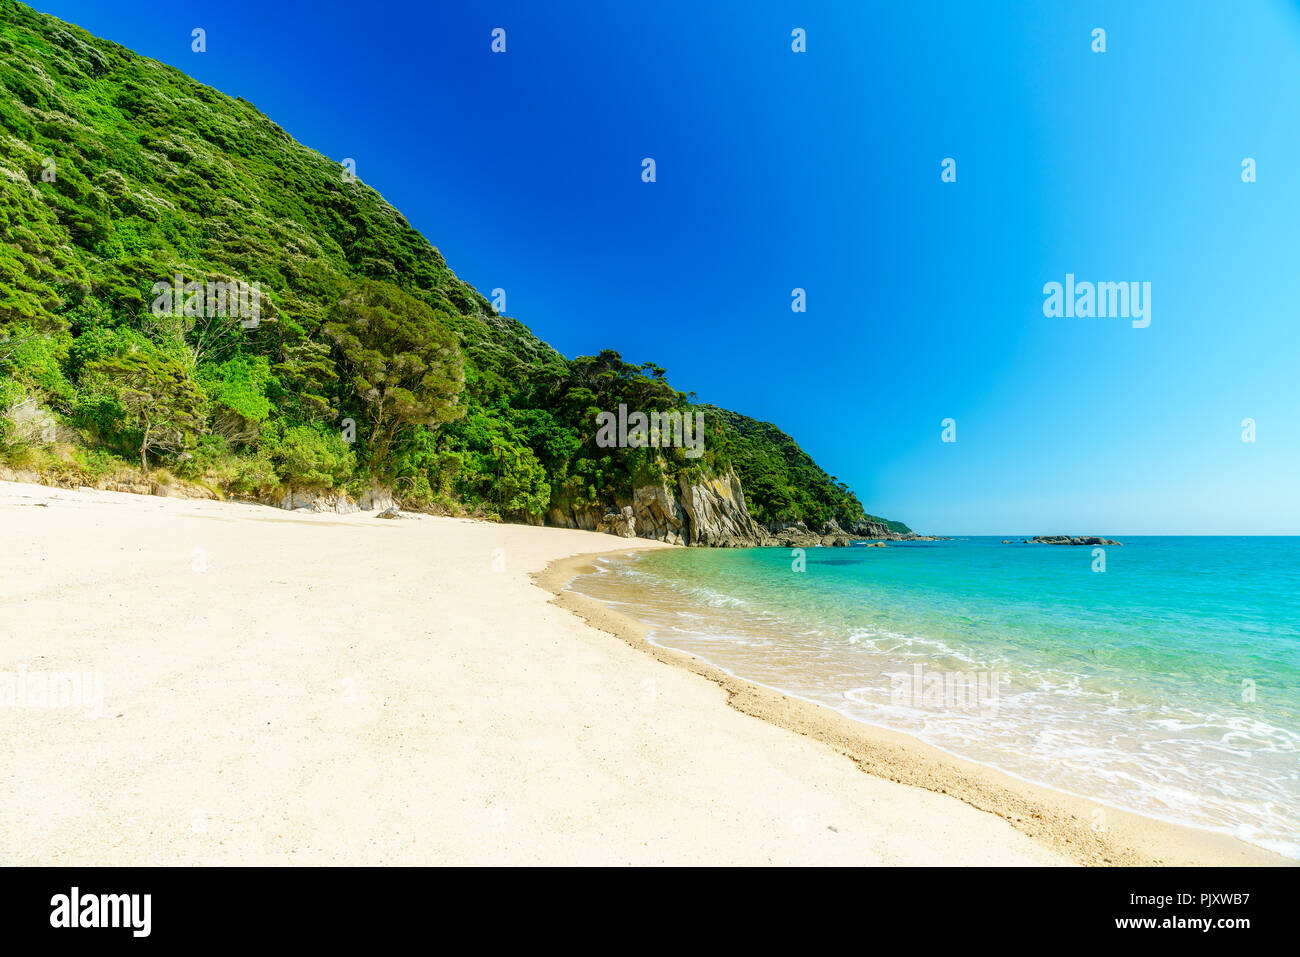 Beautiful Tropical Paradise Beach With Turquoise Water And White Sand In Abel Tasman National Park New Zealand Stock Photo Alamy